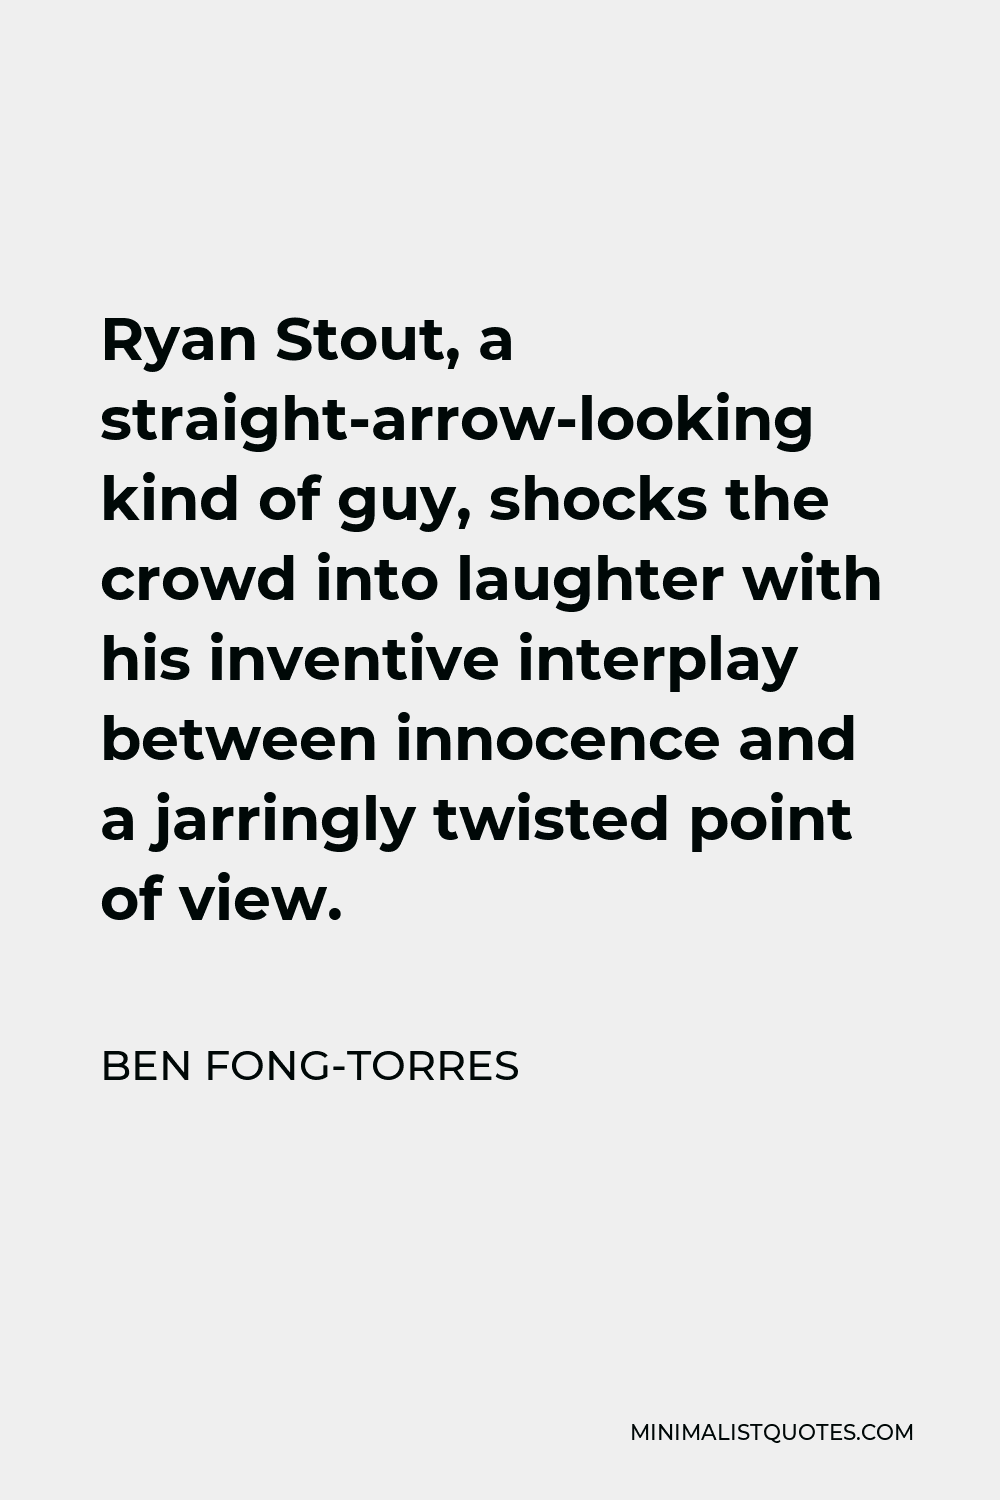 Ben Fong-Torres Quote - Ryan Stout, a straight-arrow-looking kind of guy, shocks the crowd into laughter with his inventive interplay between innocence and a jarringly twisted point of view.